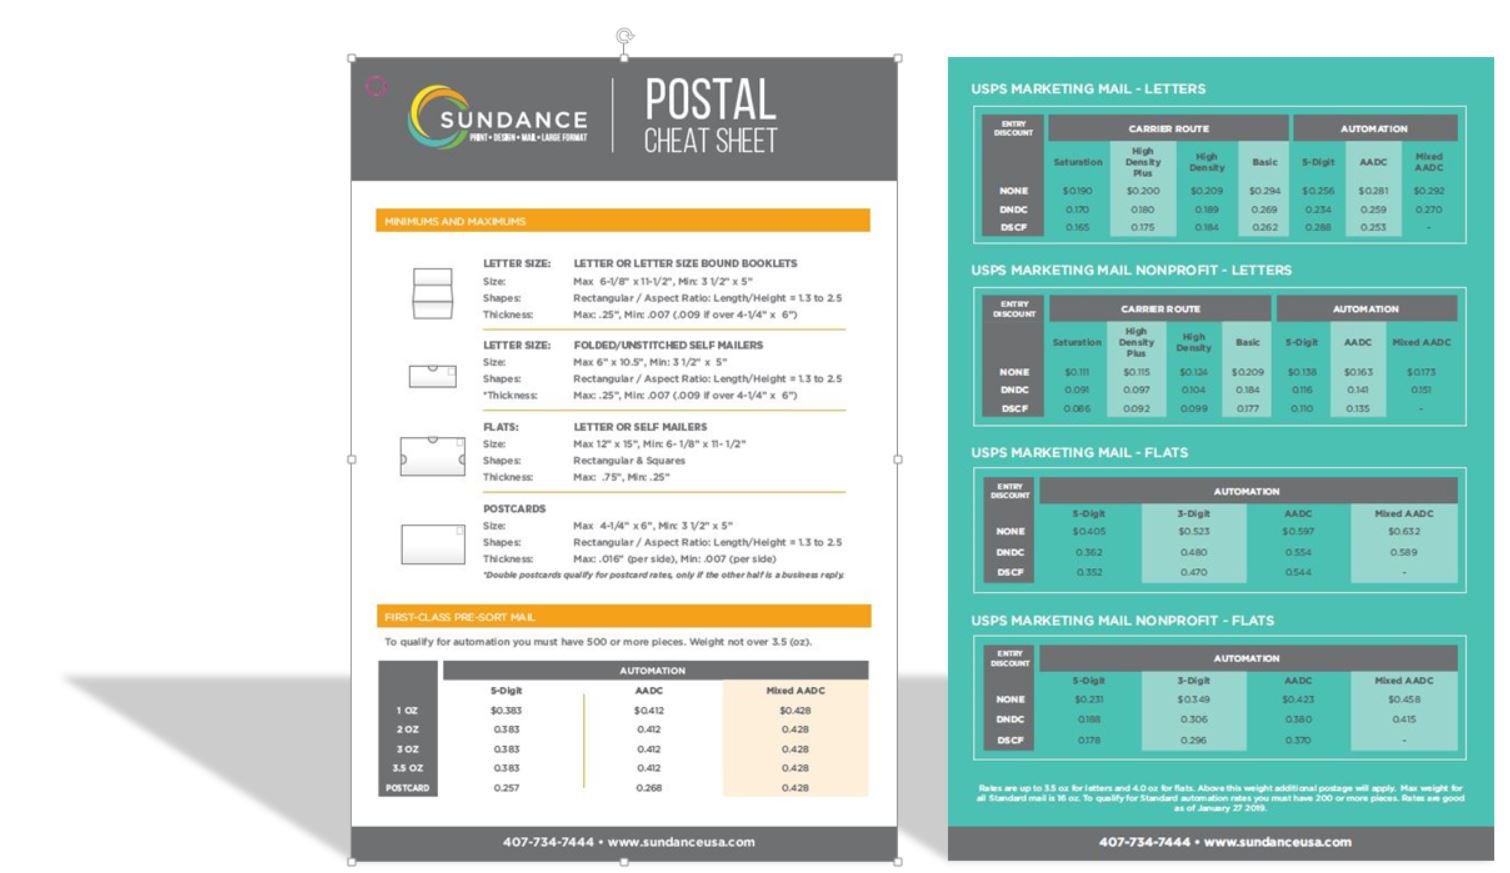 New Year, New Rates—Postal Costs Set to Increase in January 2019